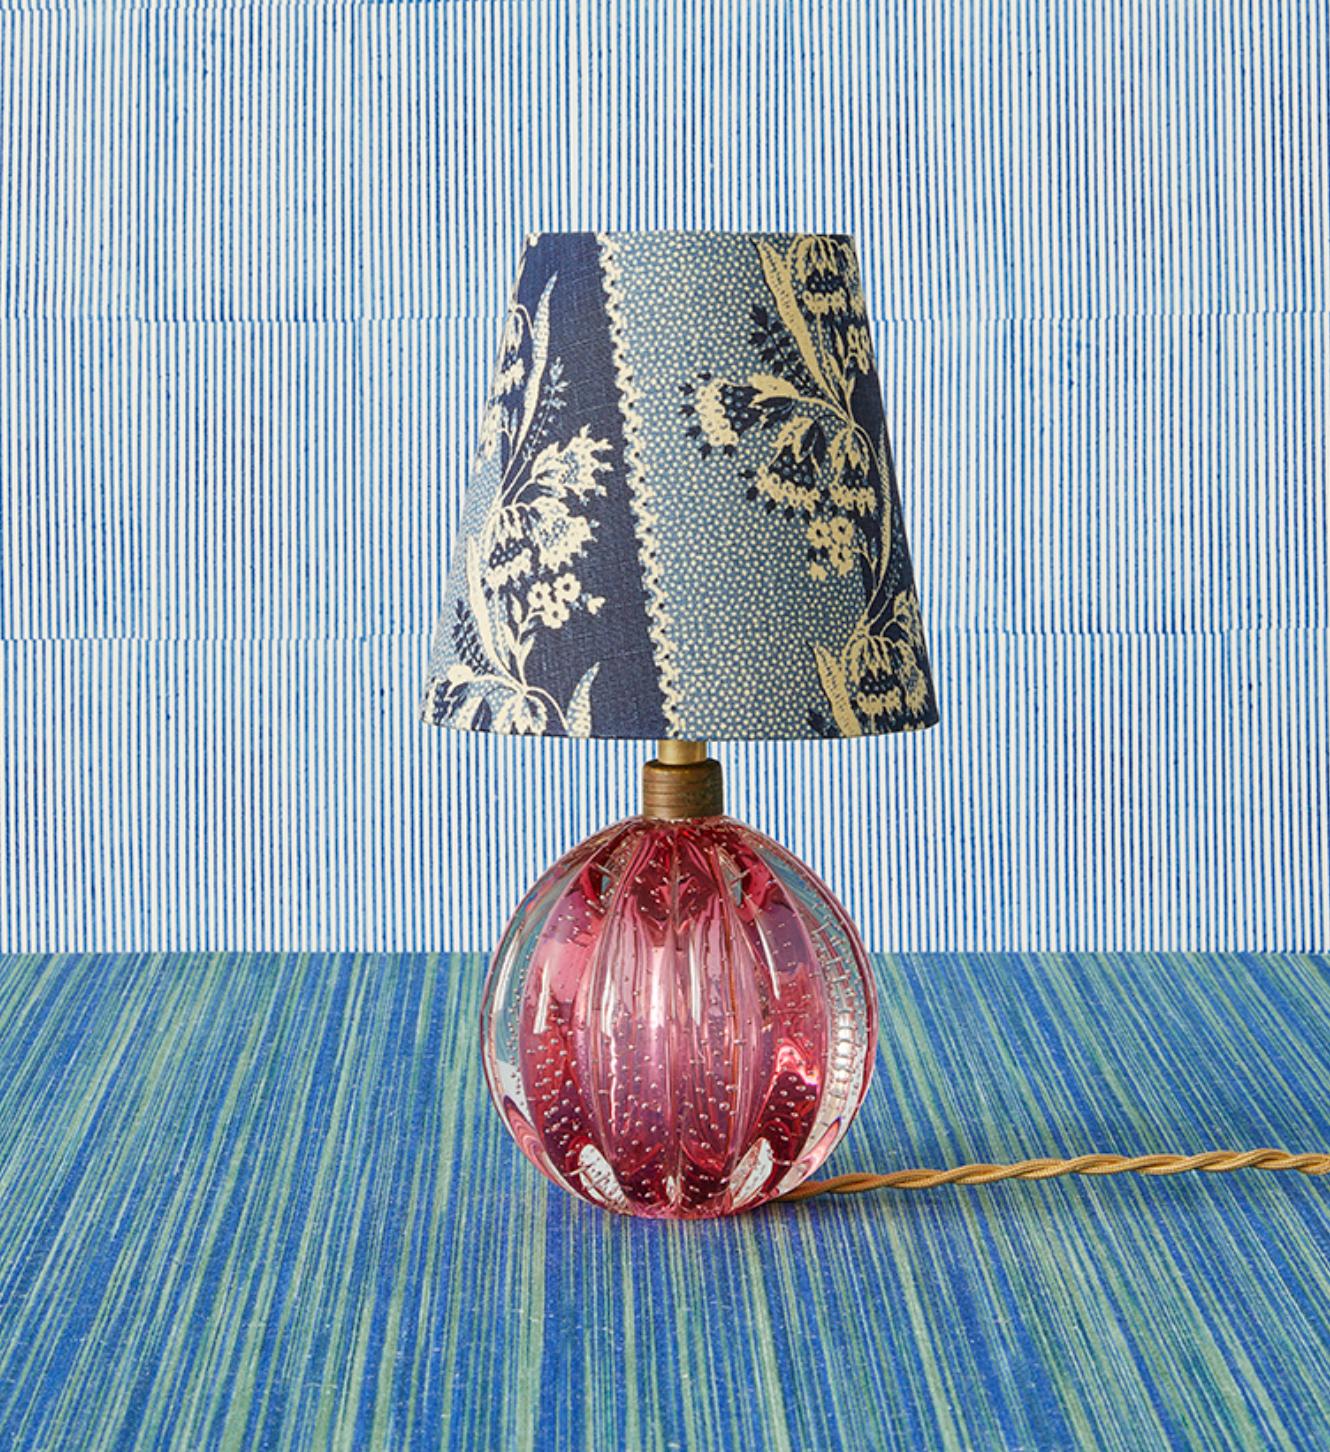 Italy, 1950s

Murano table lamps in pink glass with customized shade by The Apartment.

H 29 x Ø 16 cm